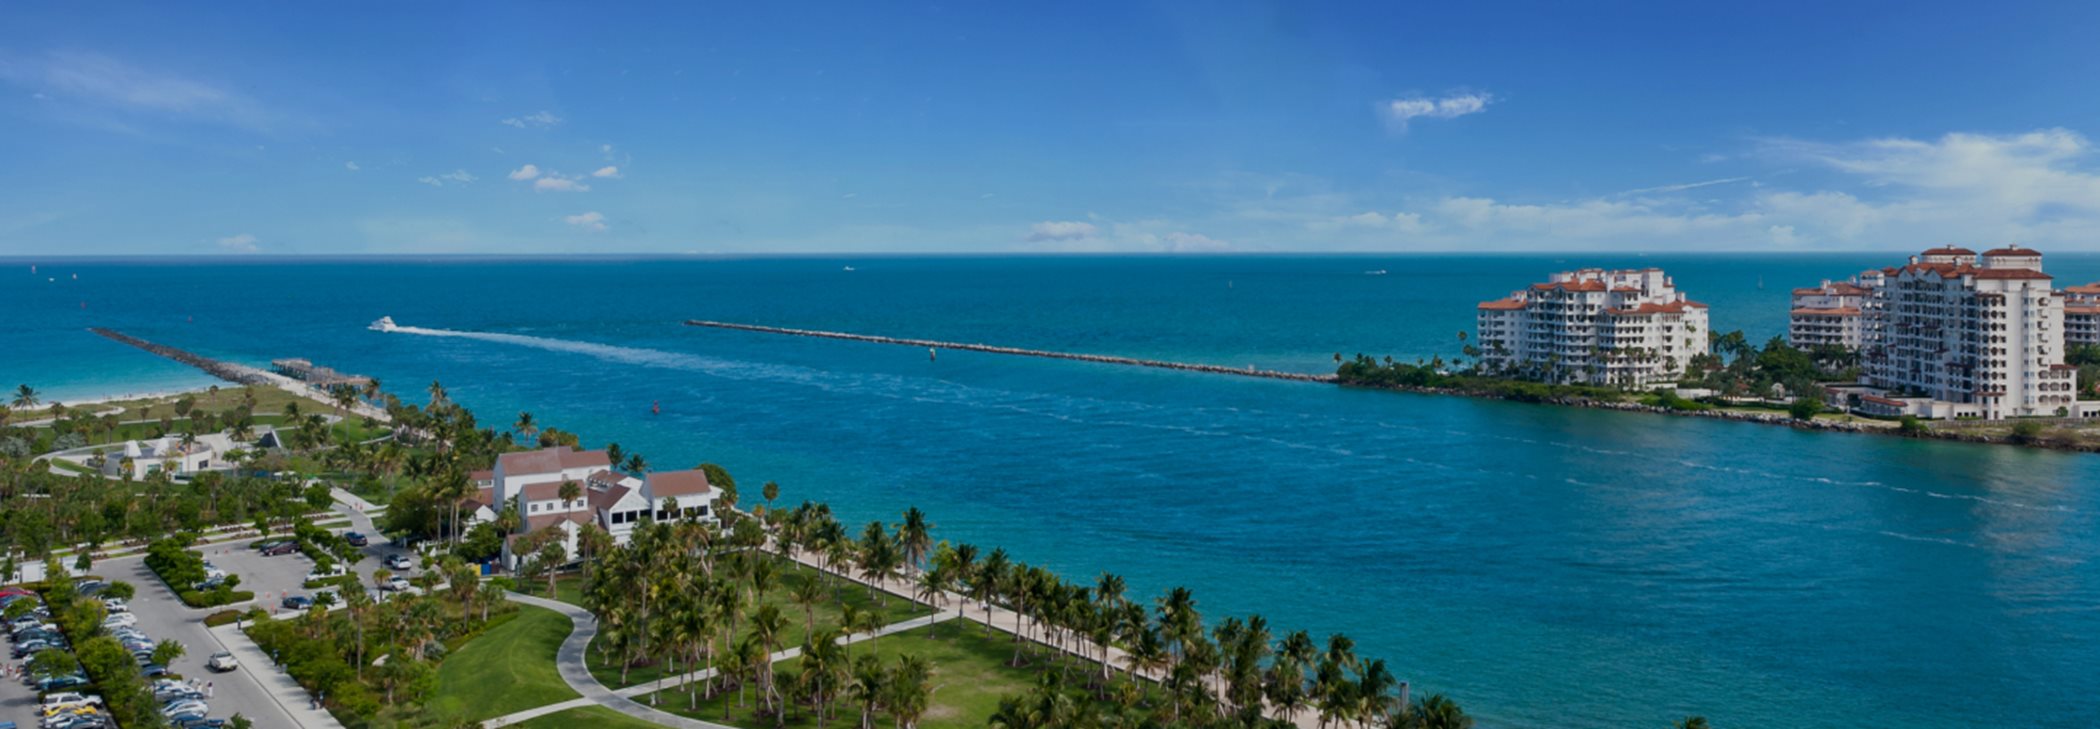 Miami South Pointe Park and Fisher Island